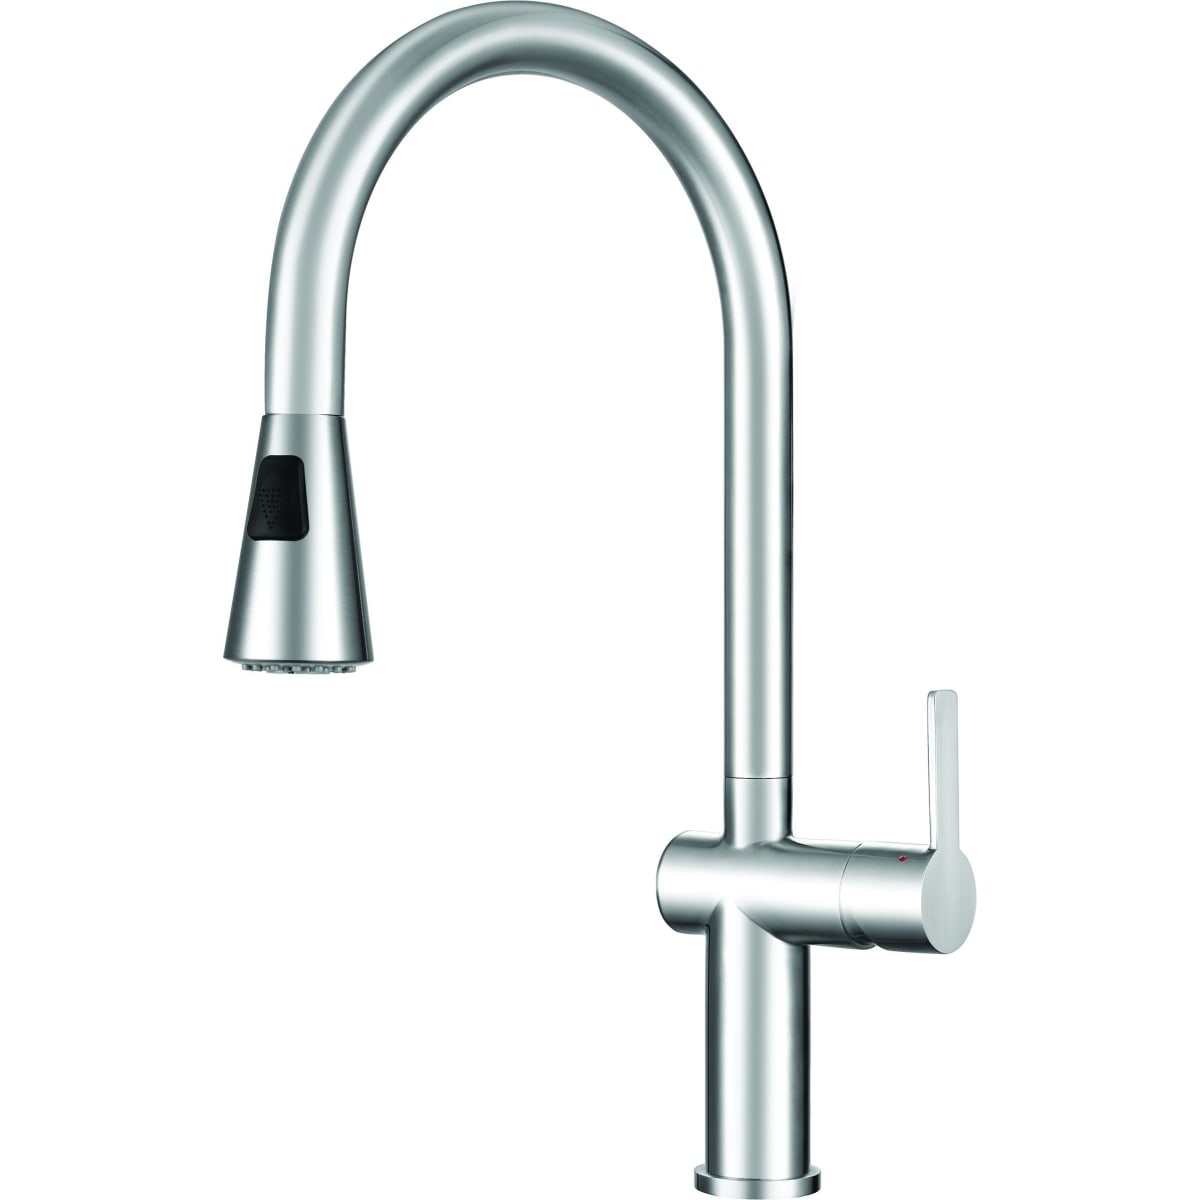 Franke Ff20750 Stainless Steel Bern Pull Down Spray Kitchen Faucet